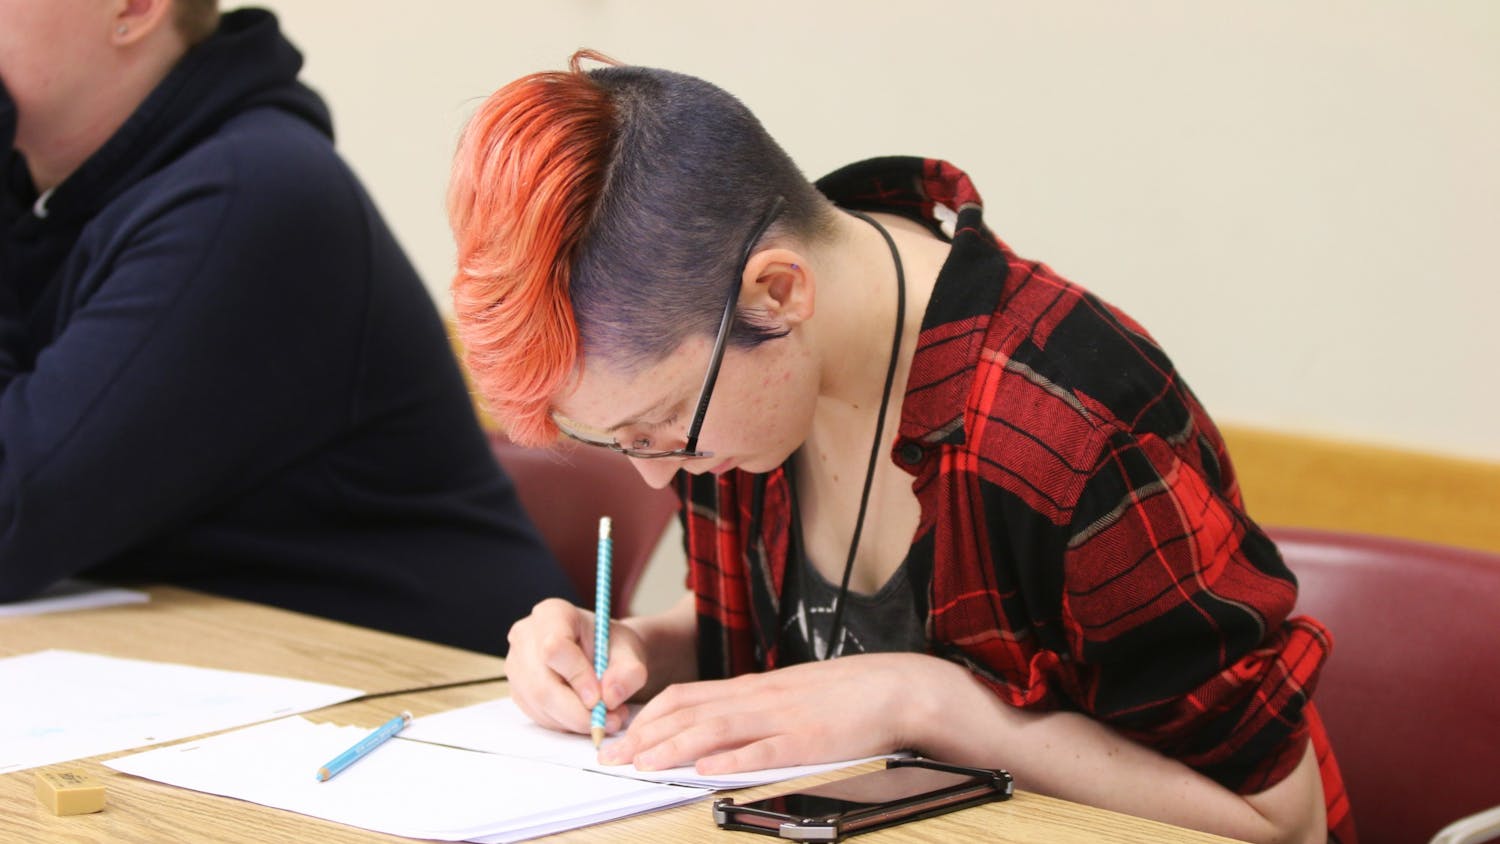 Hobby Hopping Art Club member Katelyn Osborne draws a two-dimensional sketch Wednesday at the School of Education . Wednesday’s session focused on the processes of drawing two-dimensional figures and their movement throughout multiple frames, like an animation.